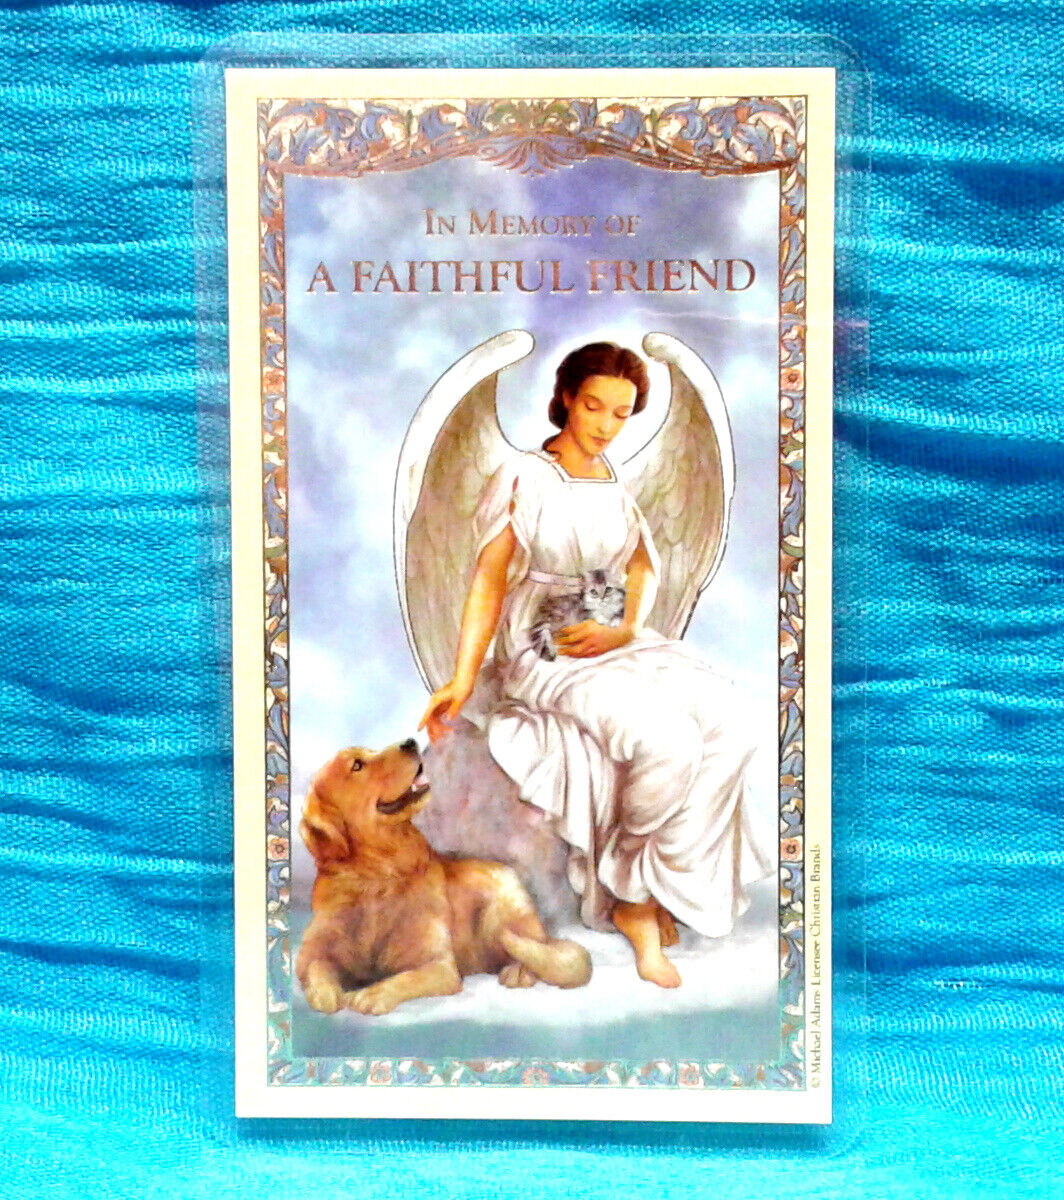 Pet LAMINATED Holy Prayer Card Gilded Gold In Memory of Loss Faithful Friend